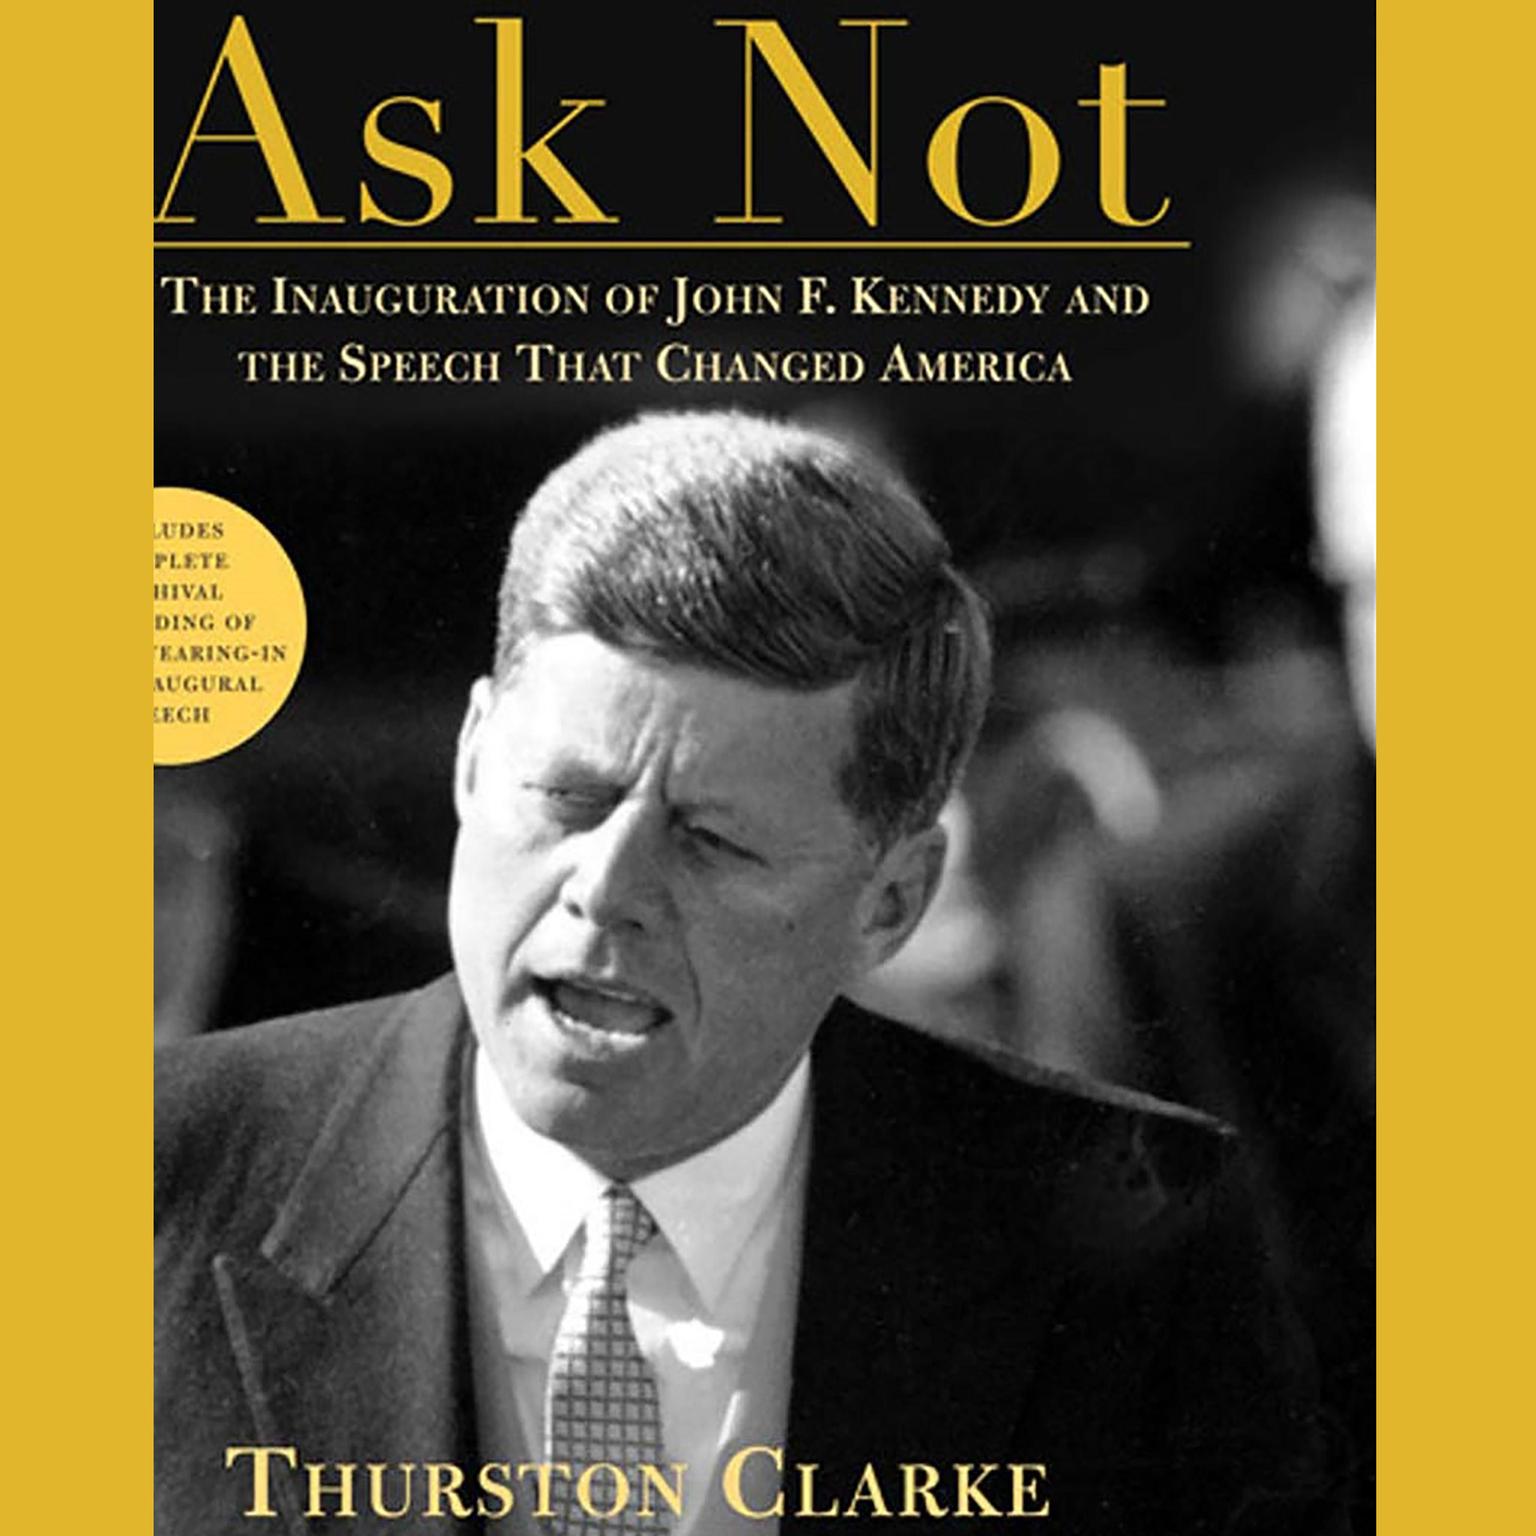 Ask Not (Abridged): The Inauguration of John F. Kennedy and the Speech That Changed America Audiobook, by Thurston Clarke